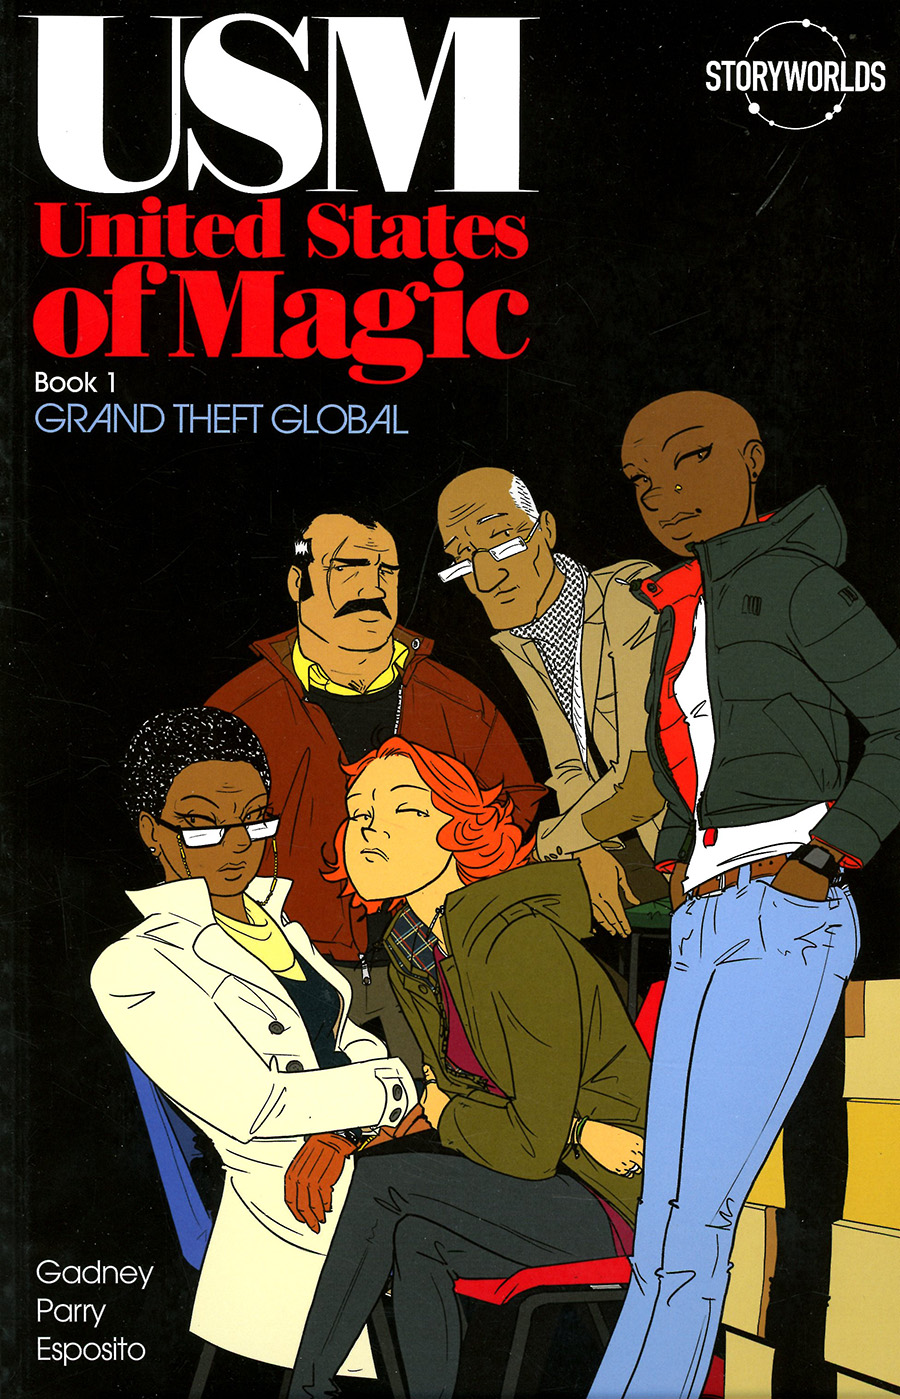 USM United States Of Magic Book 1 Grand Theft Global GN